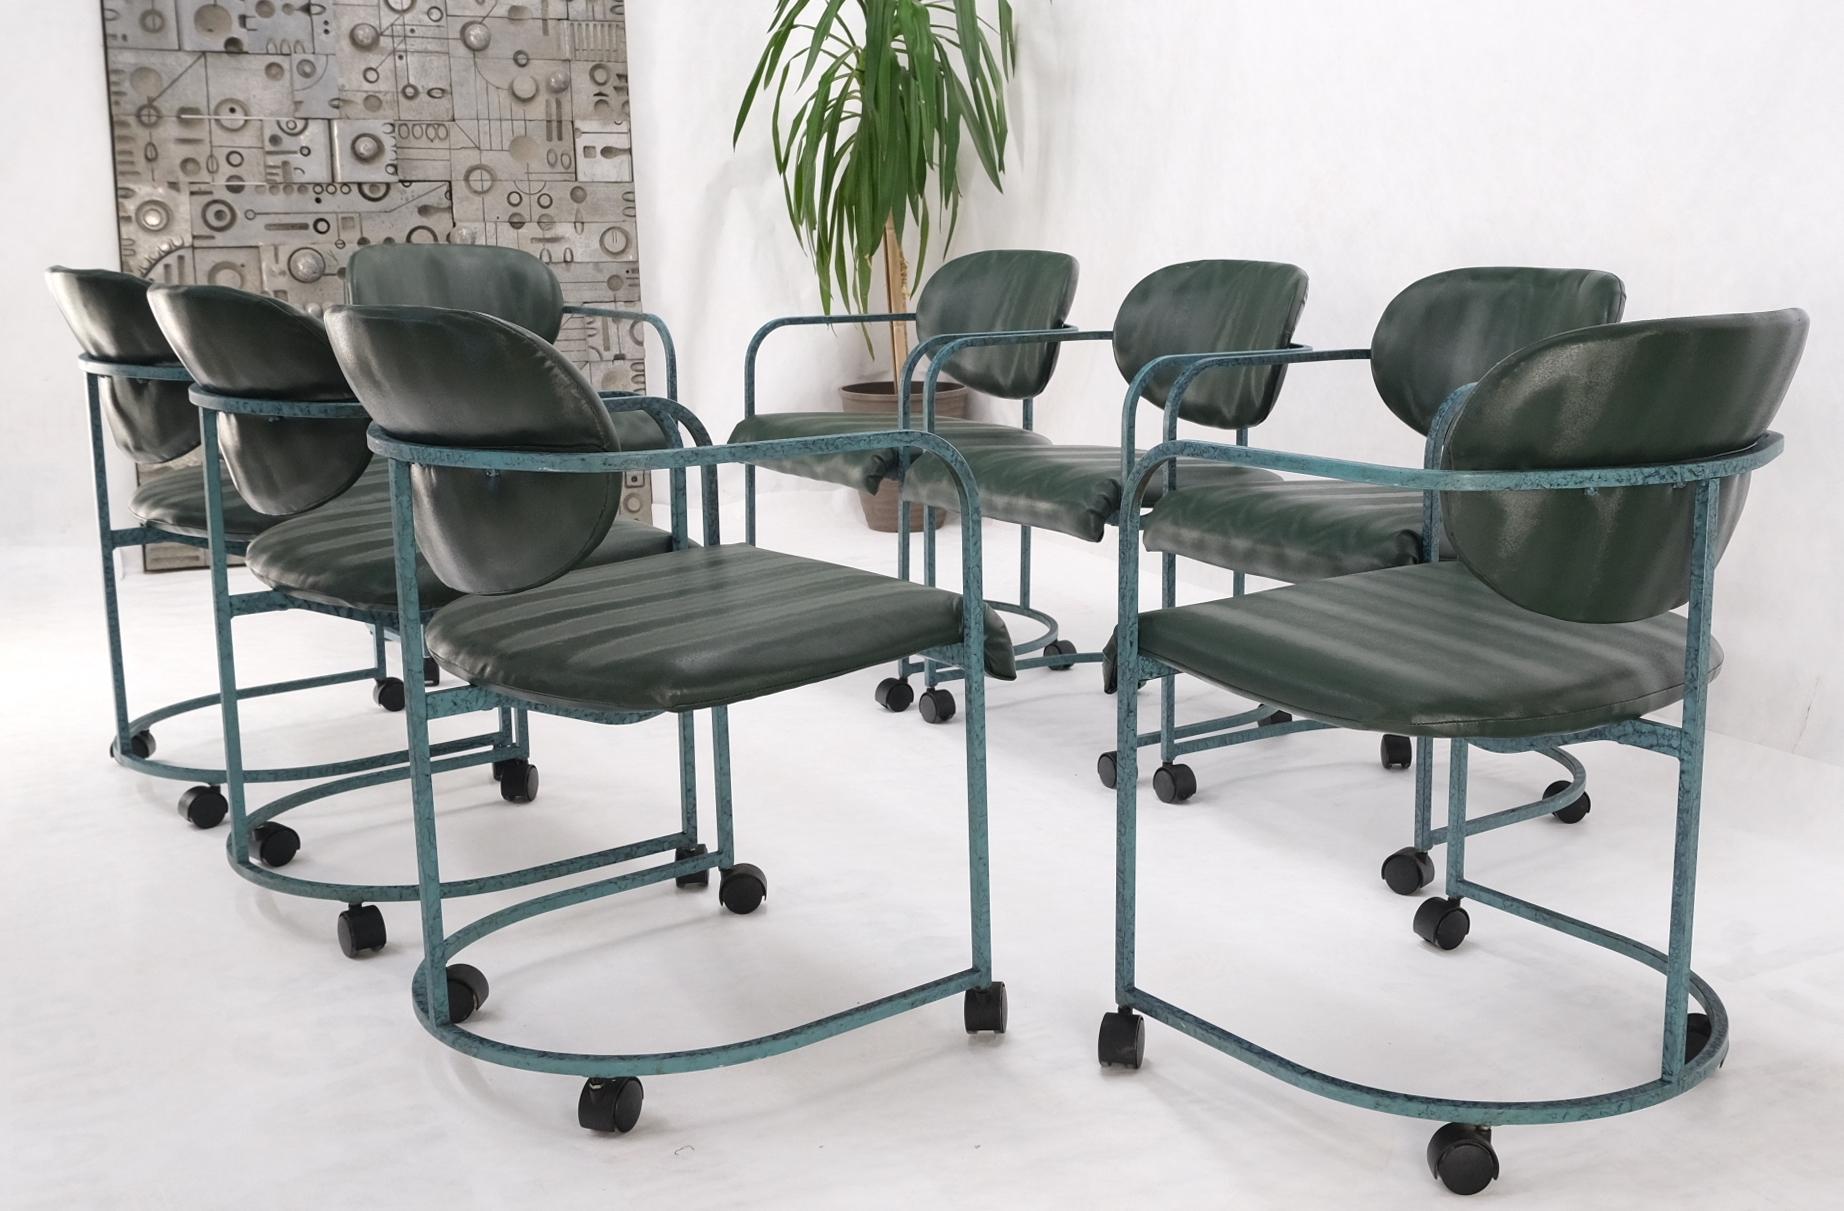 DIA Set of Green Upholstery Mid Century Dining Office Chairs on Wheels 5